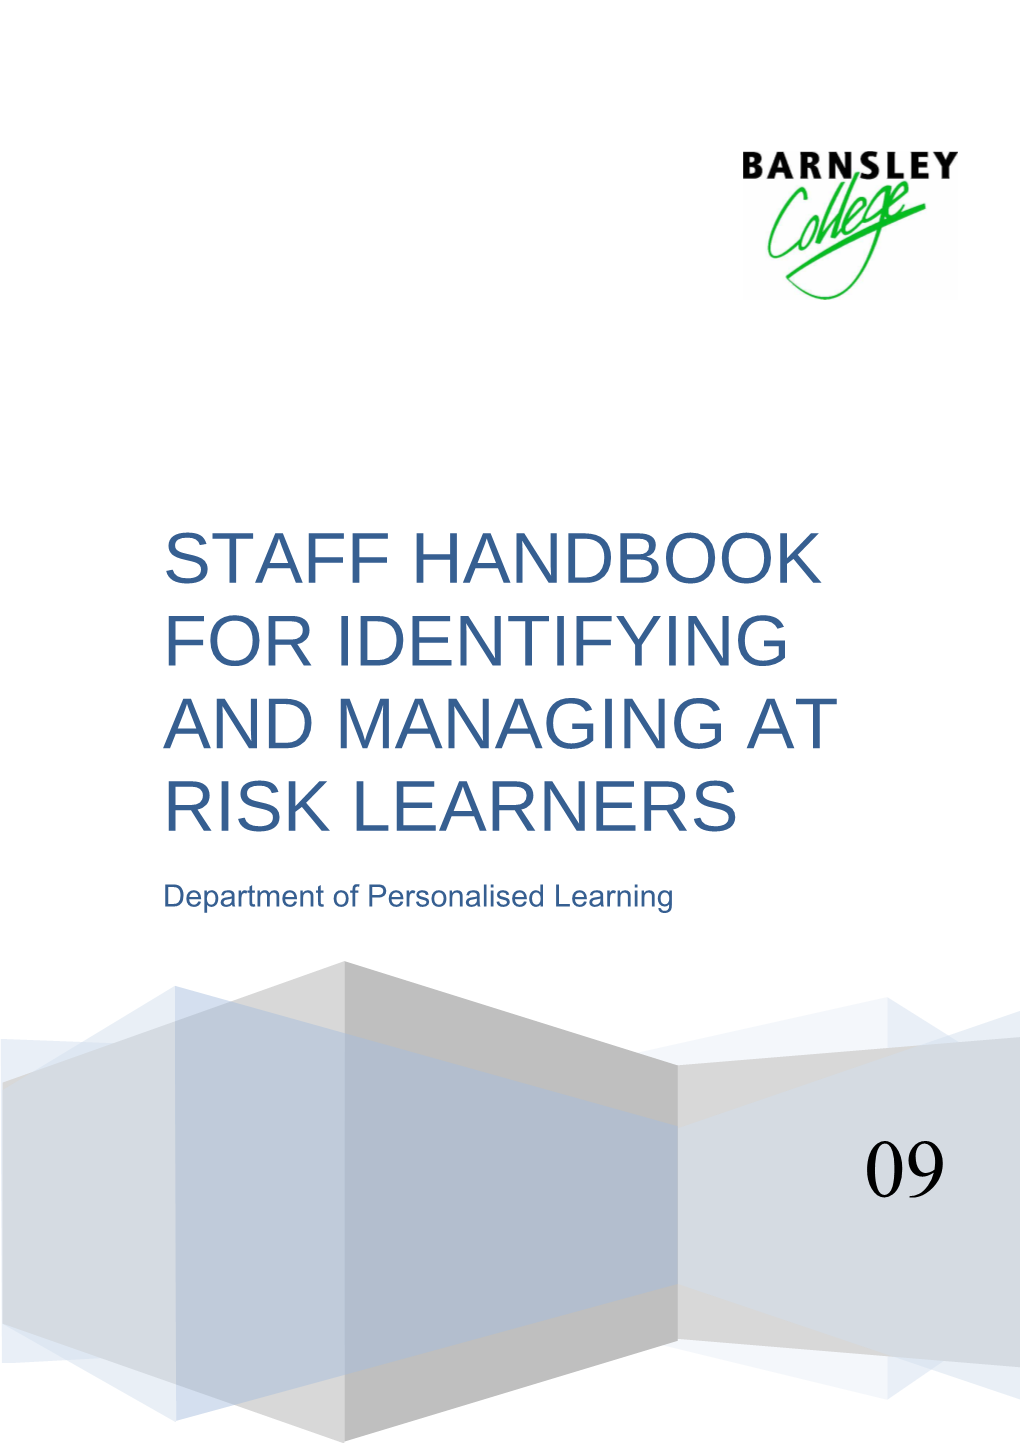 Staff Handbook for Identifying and Managing at Risk Learners